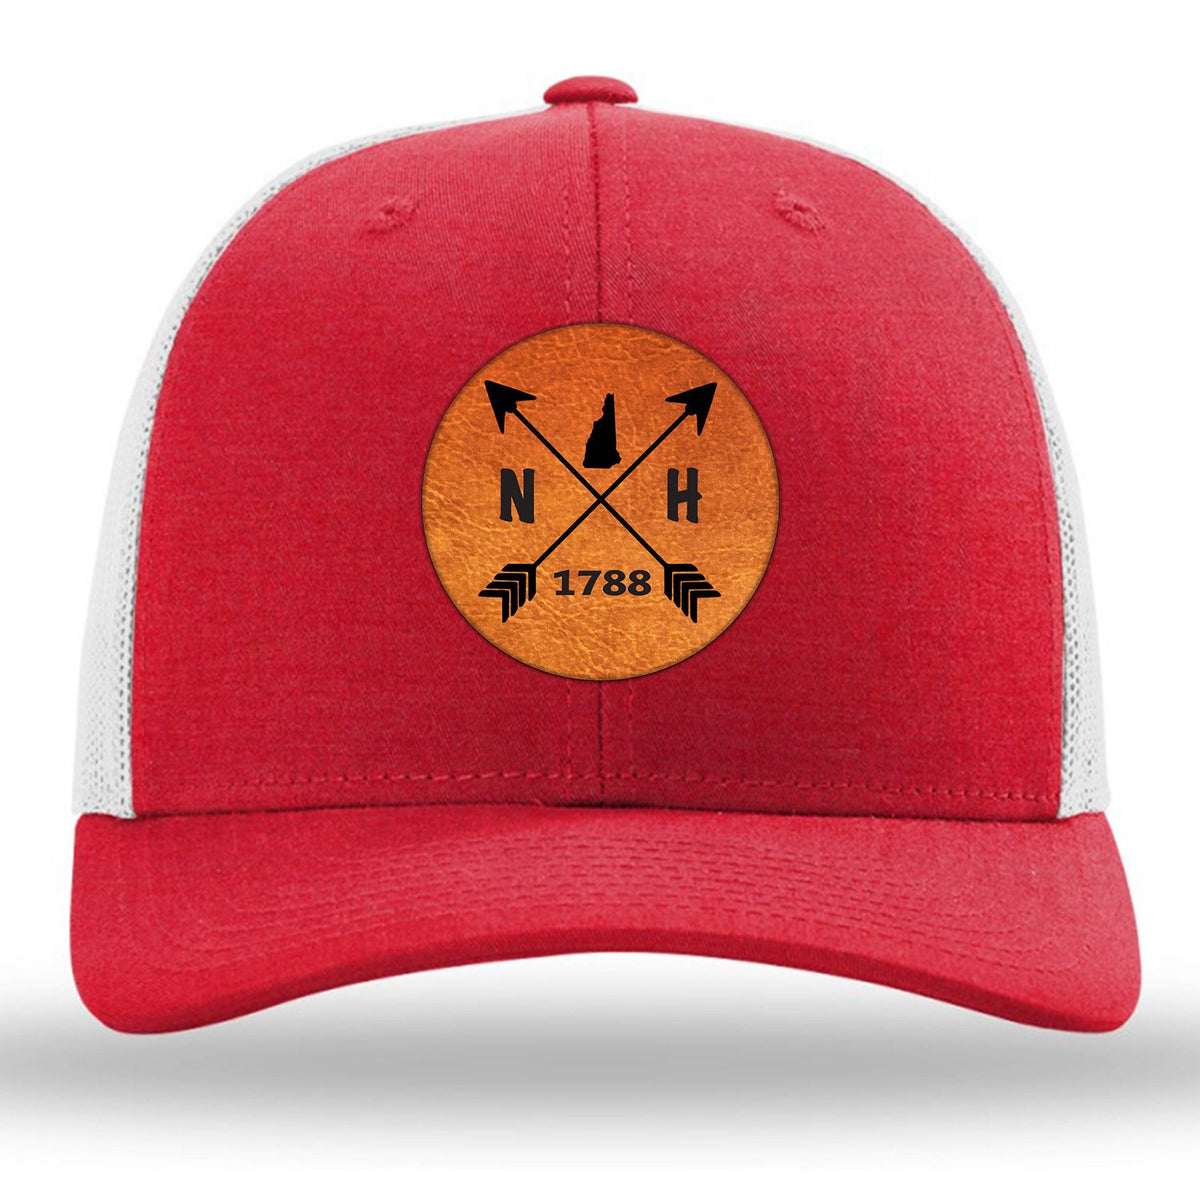 New Hampshire State Arrows - Leather Patch Trucker Hat